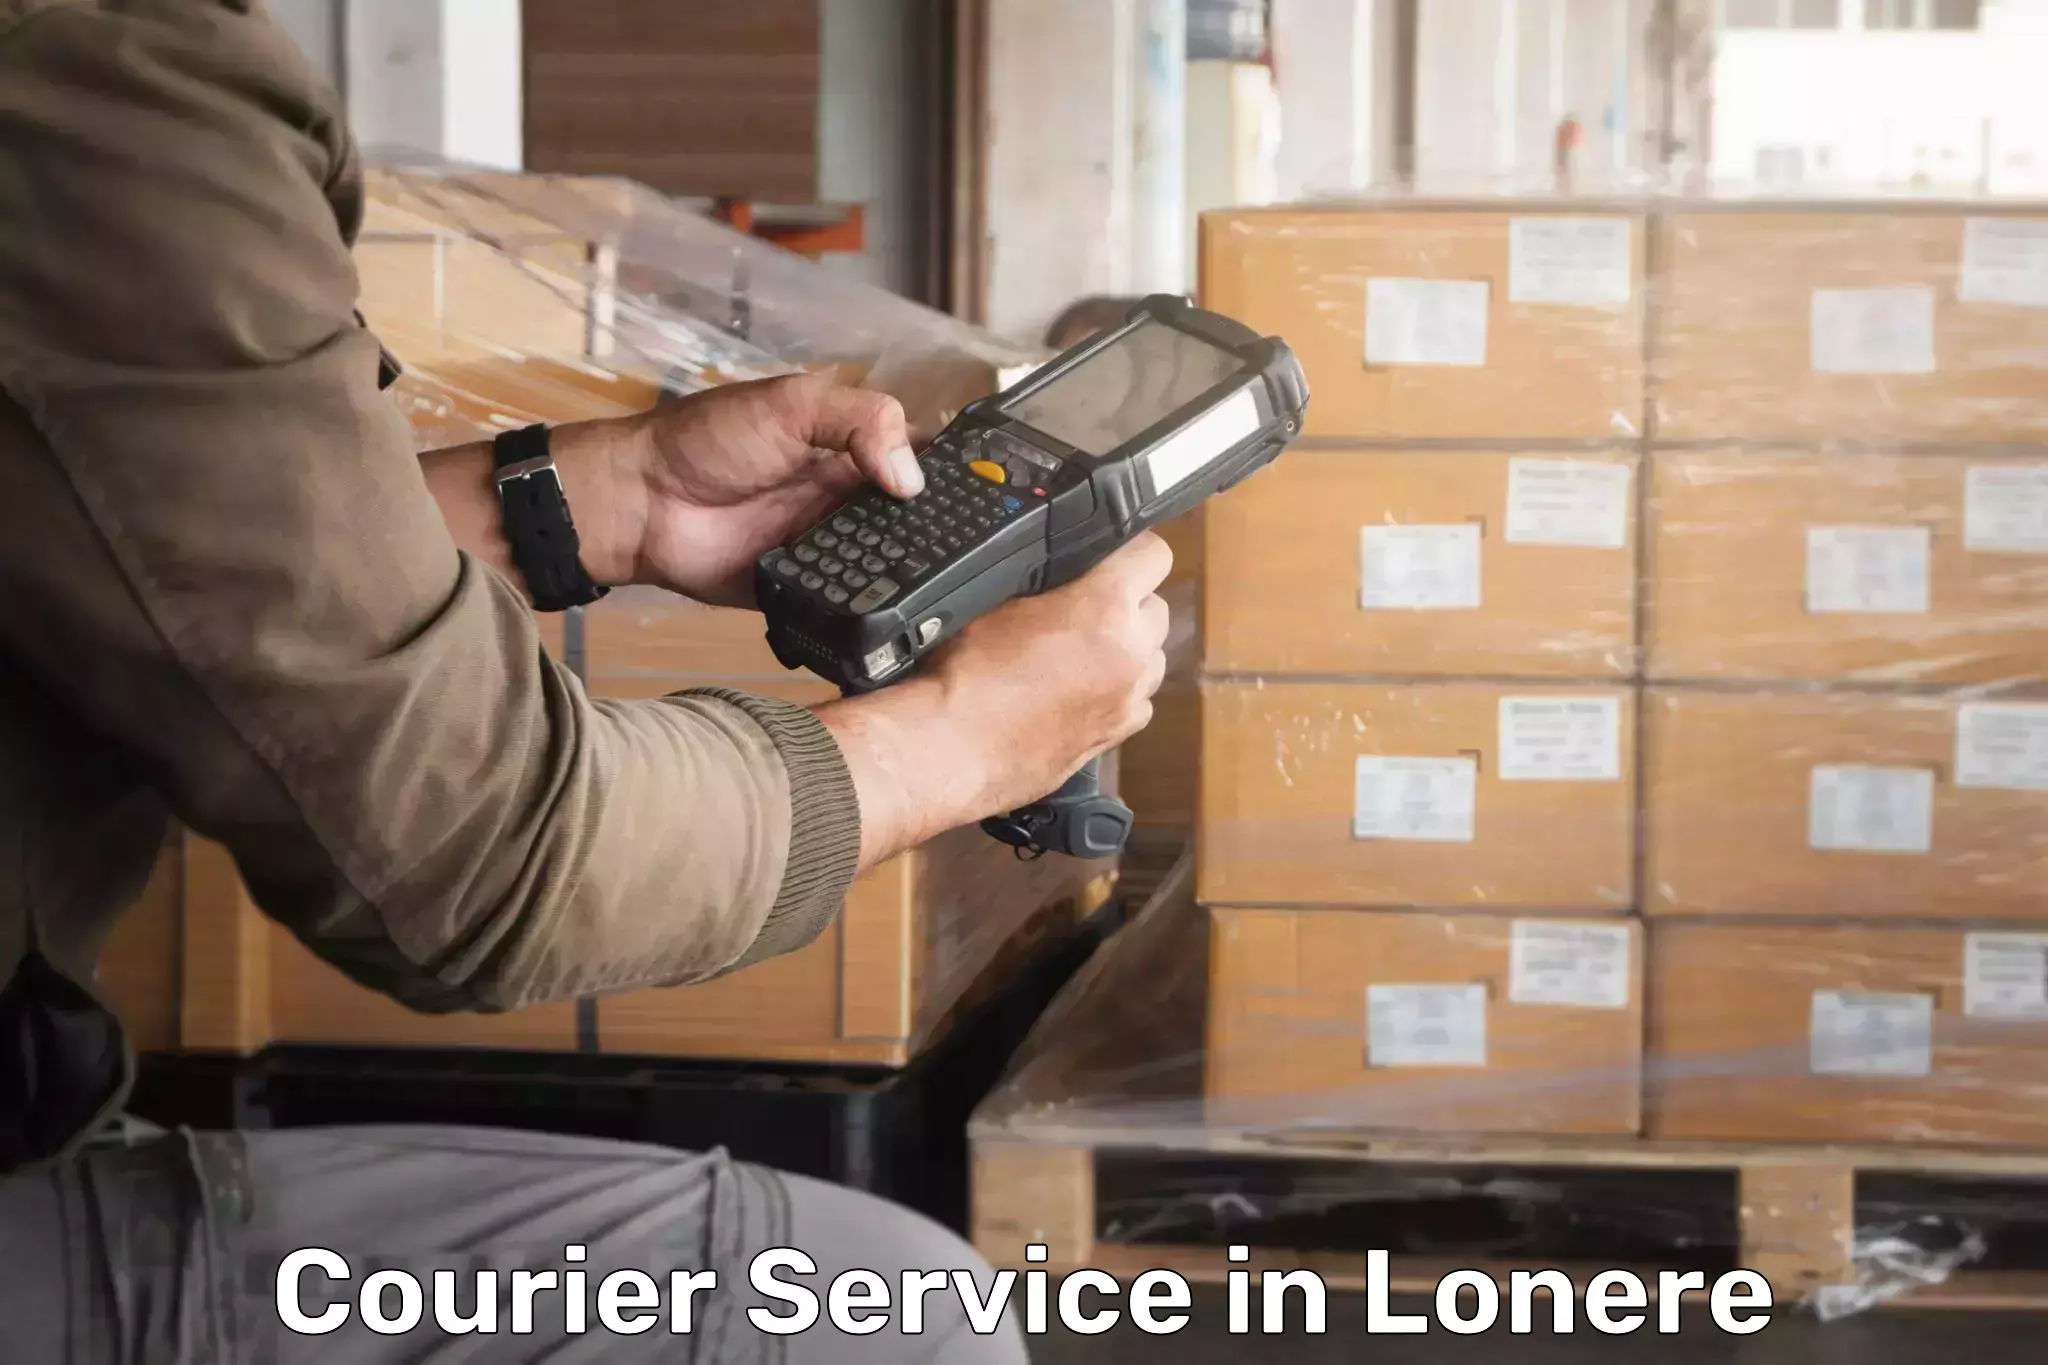 Express logistics providers in Lonere